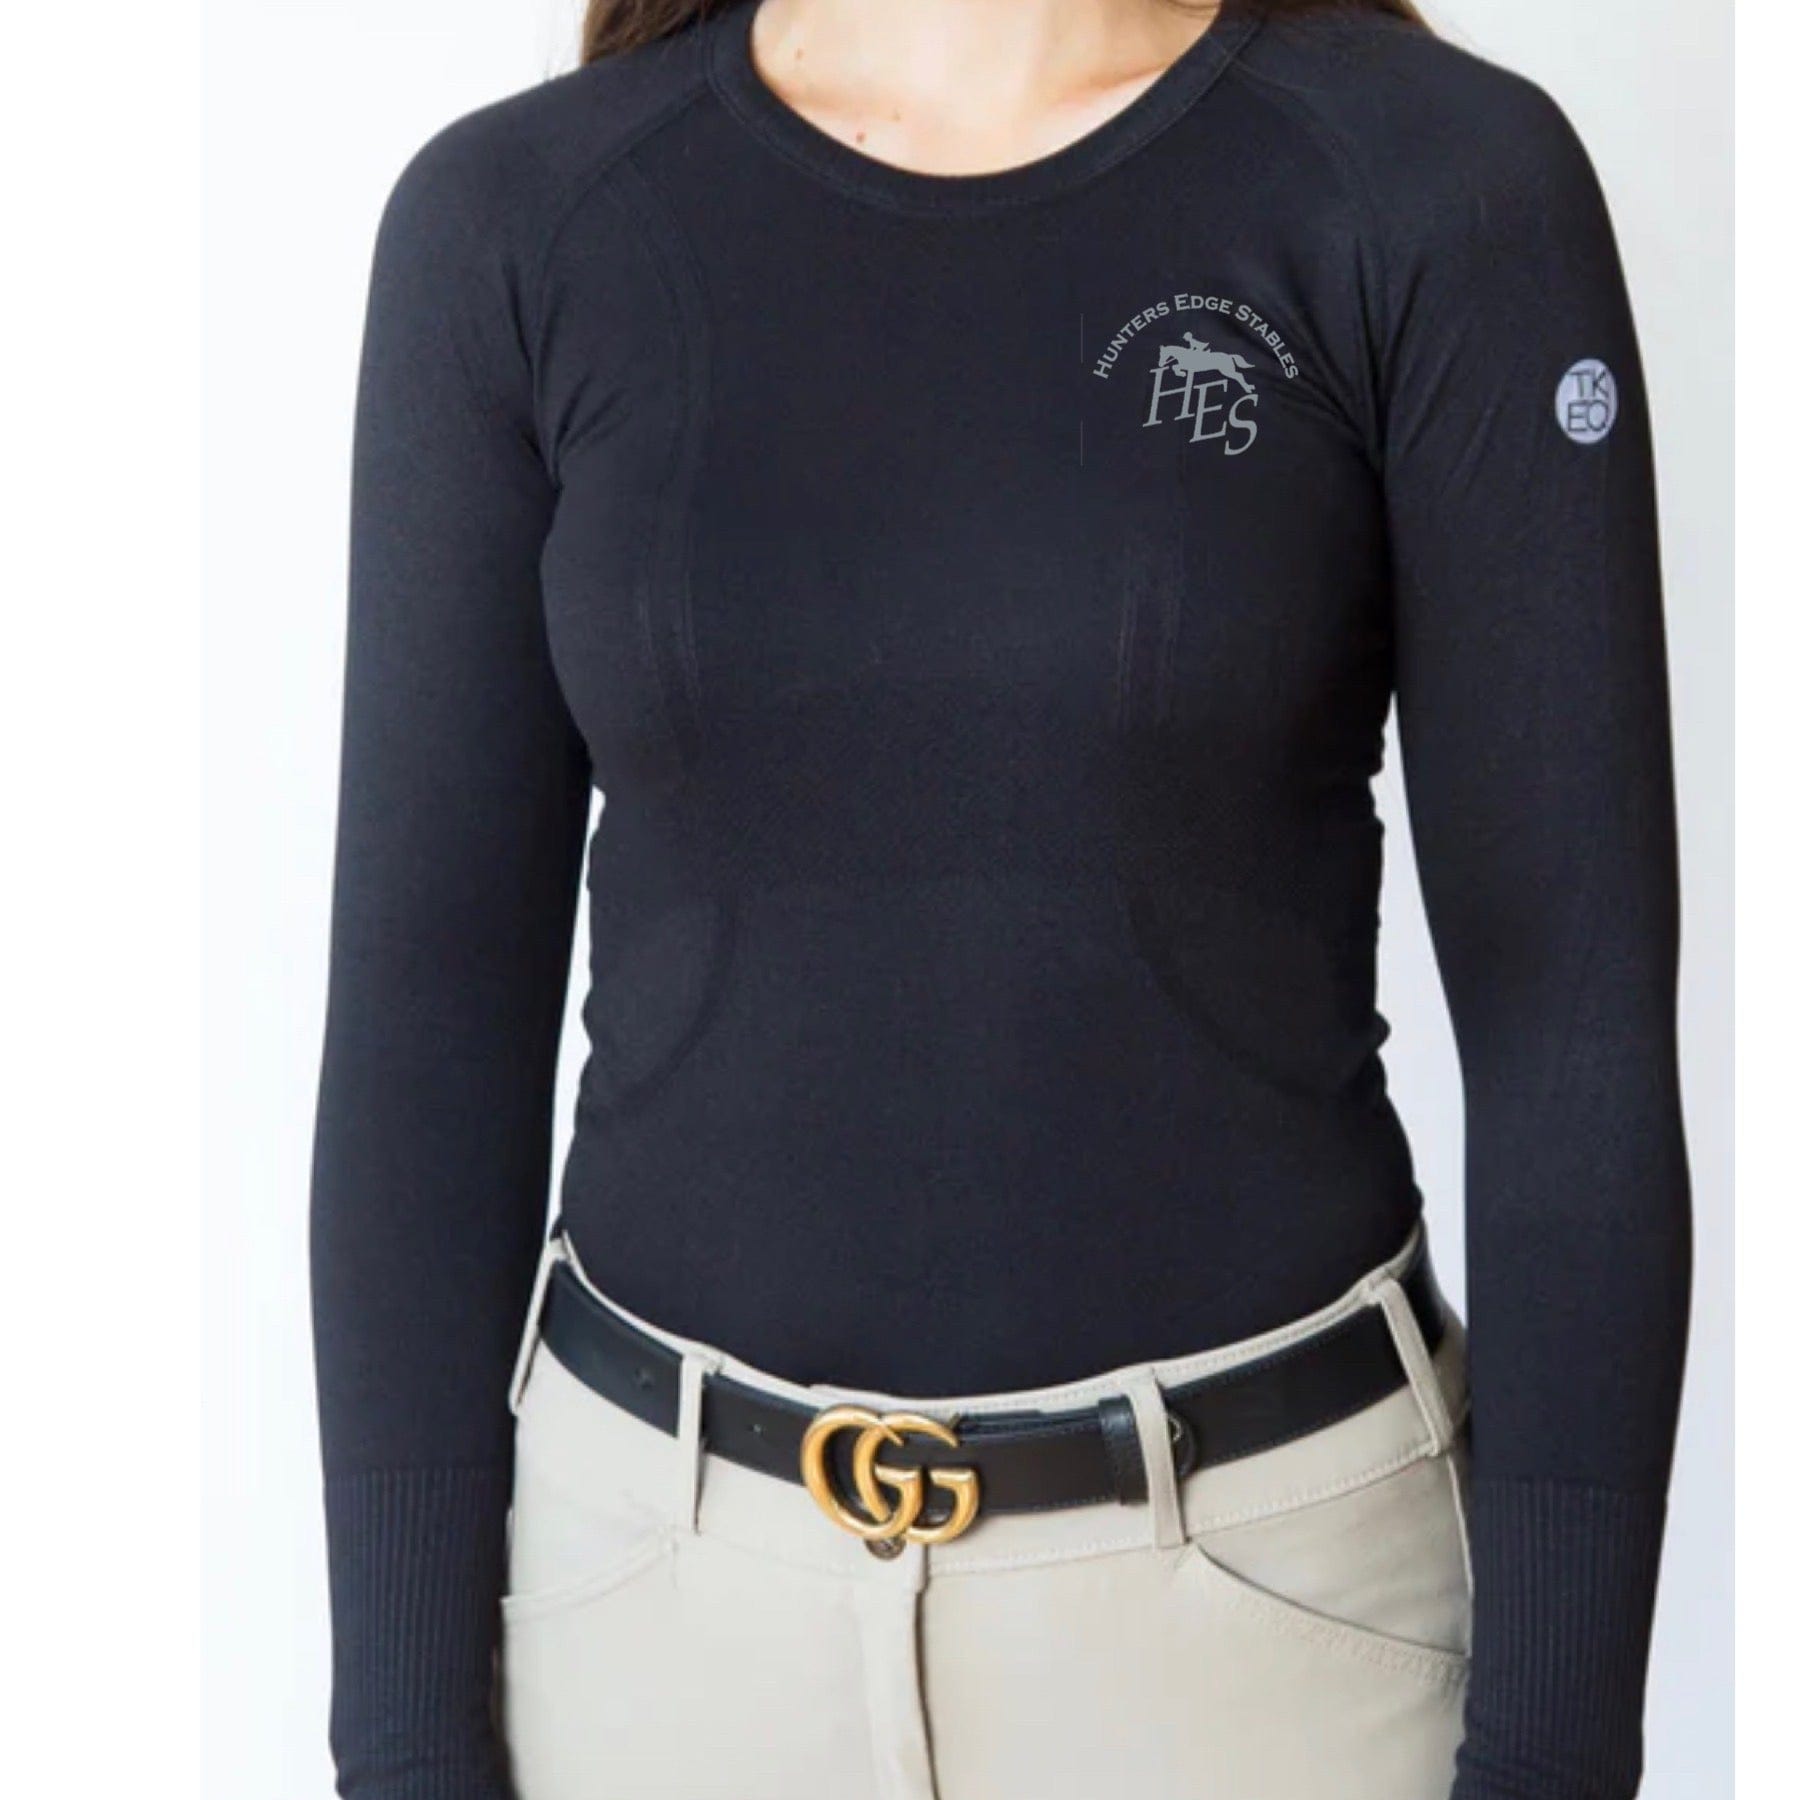 Equestrian Team Apparel Hunters Edge Stables TKEQ tech shirt equestrian team apparel online tack store mobile tack store custom farm apparel custom show stable clothing equestrian lifestyle horse show clothing riding clothes horses equestrian tack store